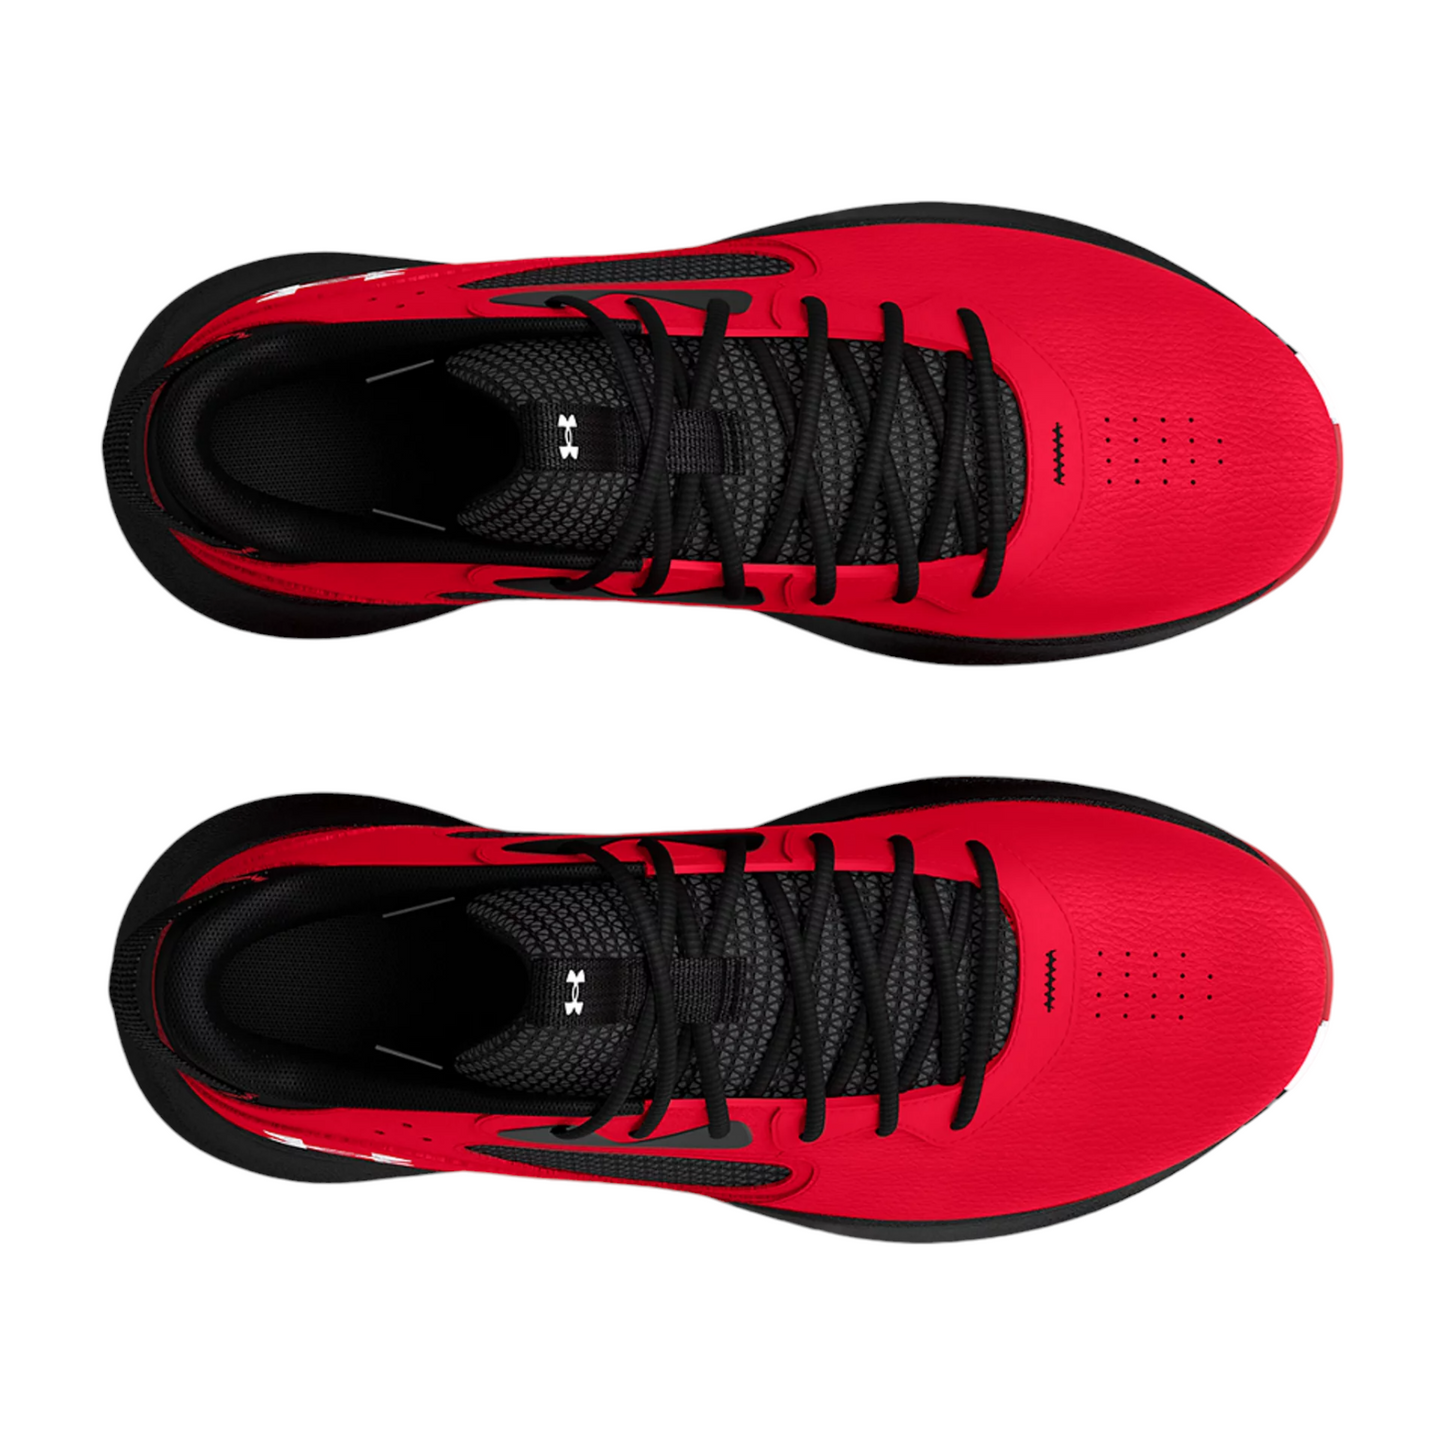 - UNDER ARMOUR MENS LOCKDOWN 6 RED/BLACK/WHITE (3025616 600) - DOW - R2L17